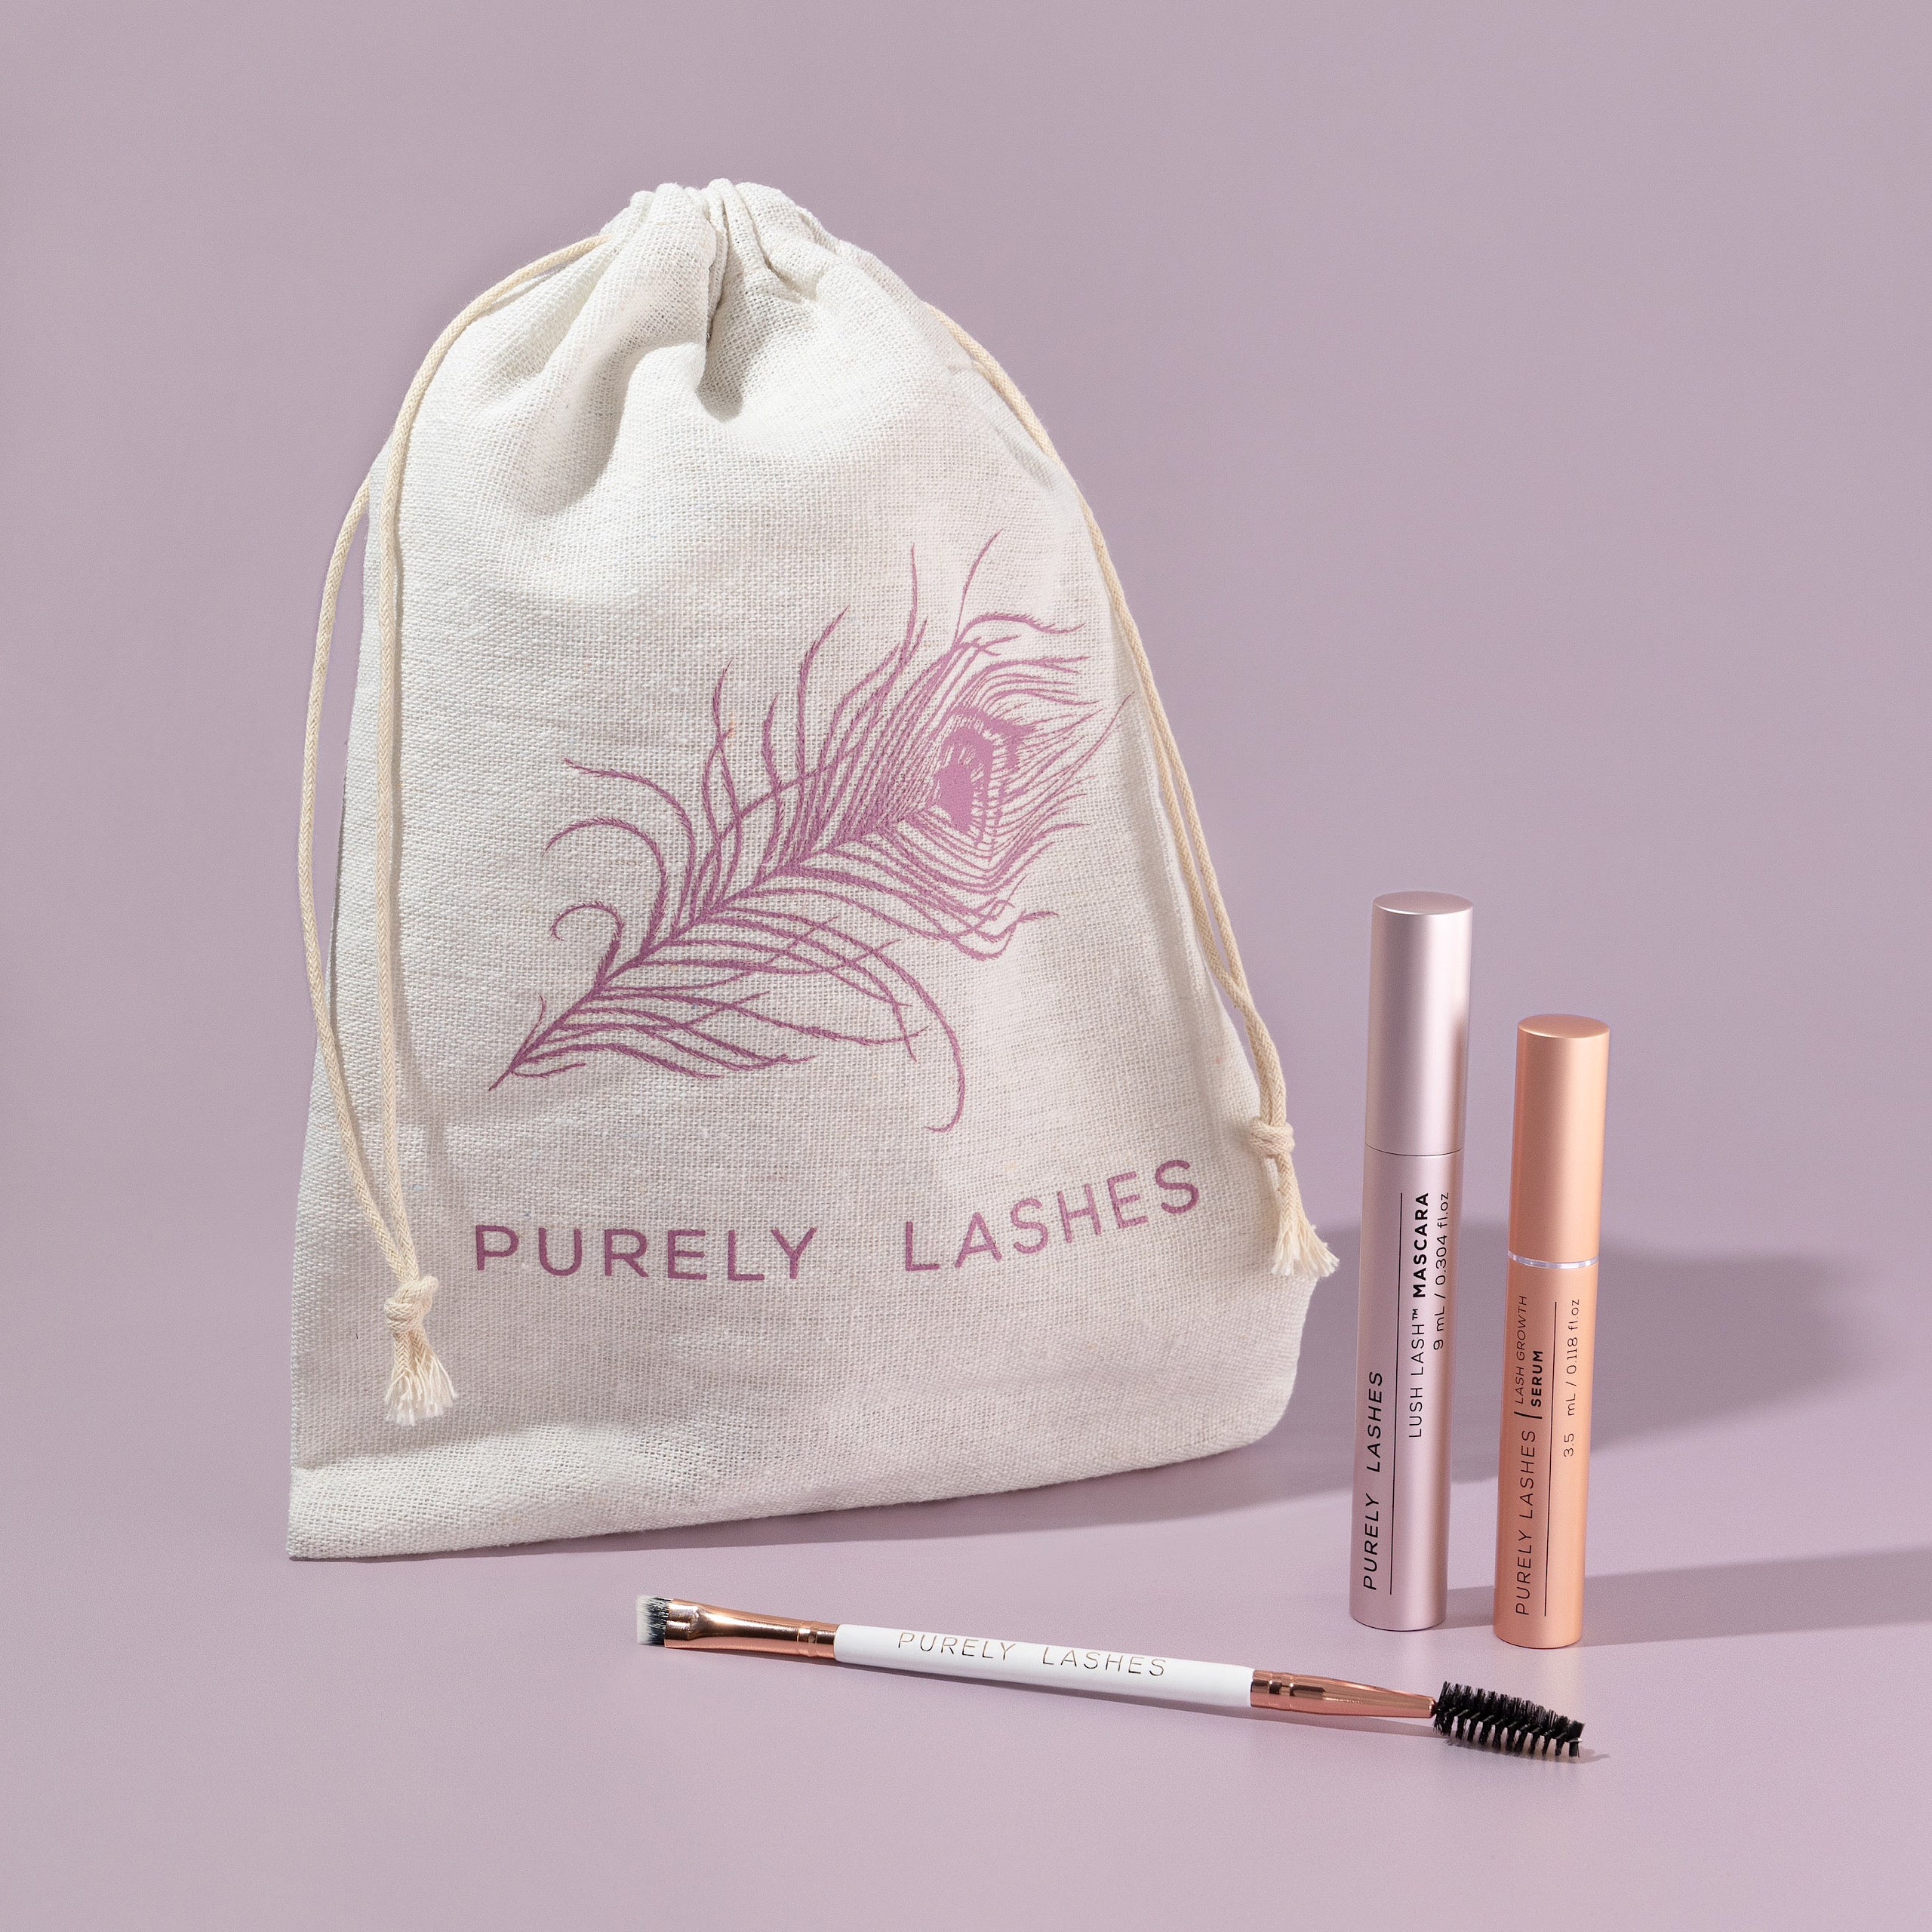 Lash Growth Mascara and Growth Serum on a pink background